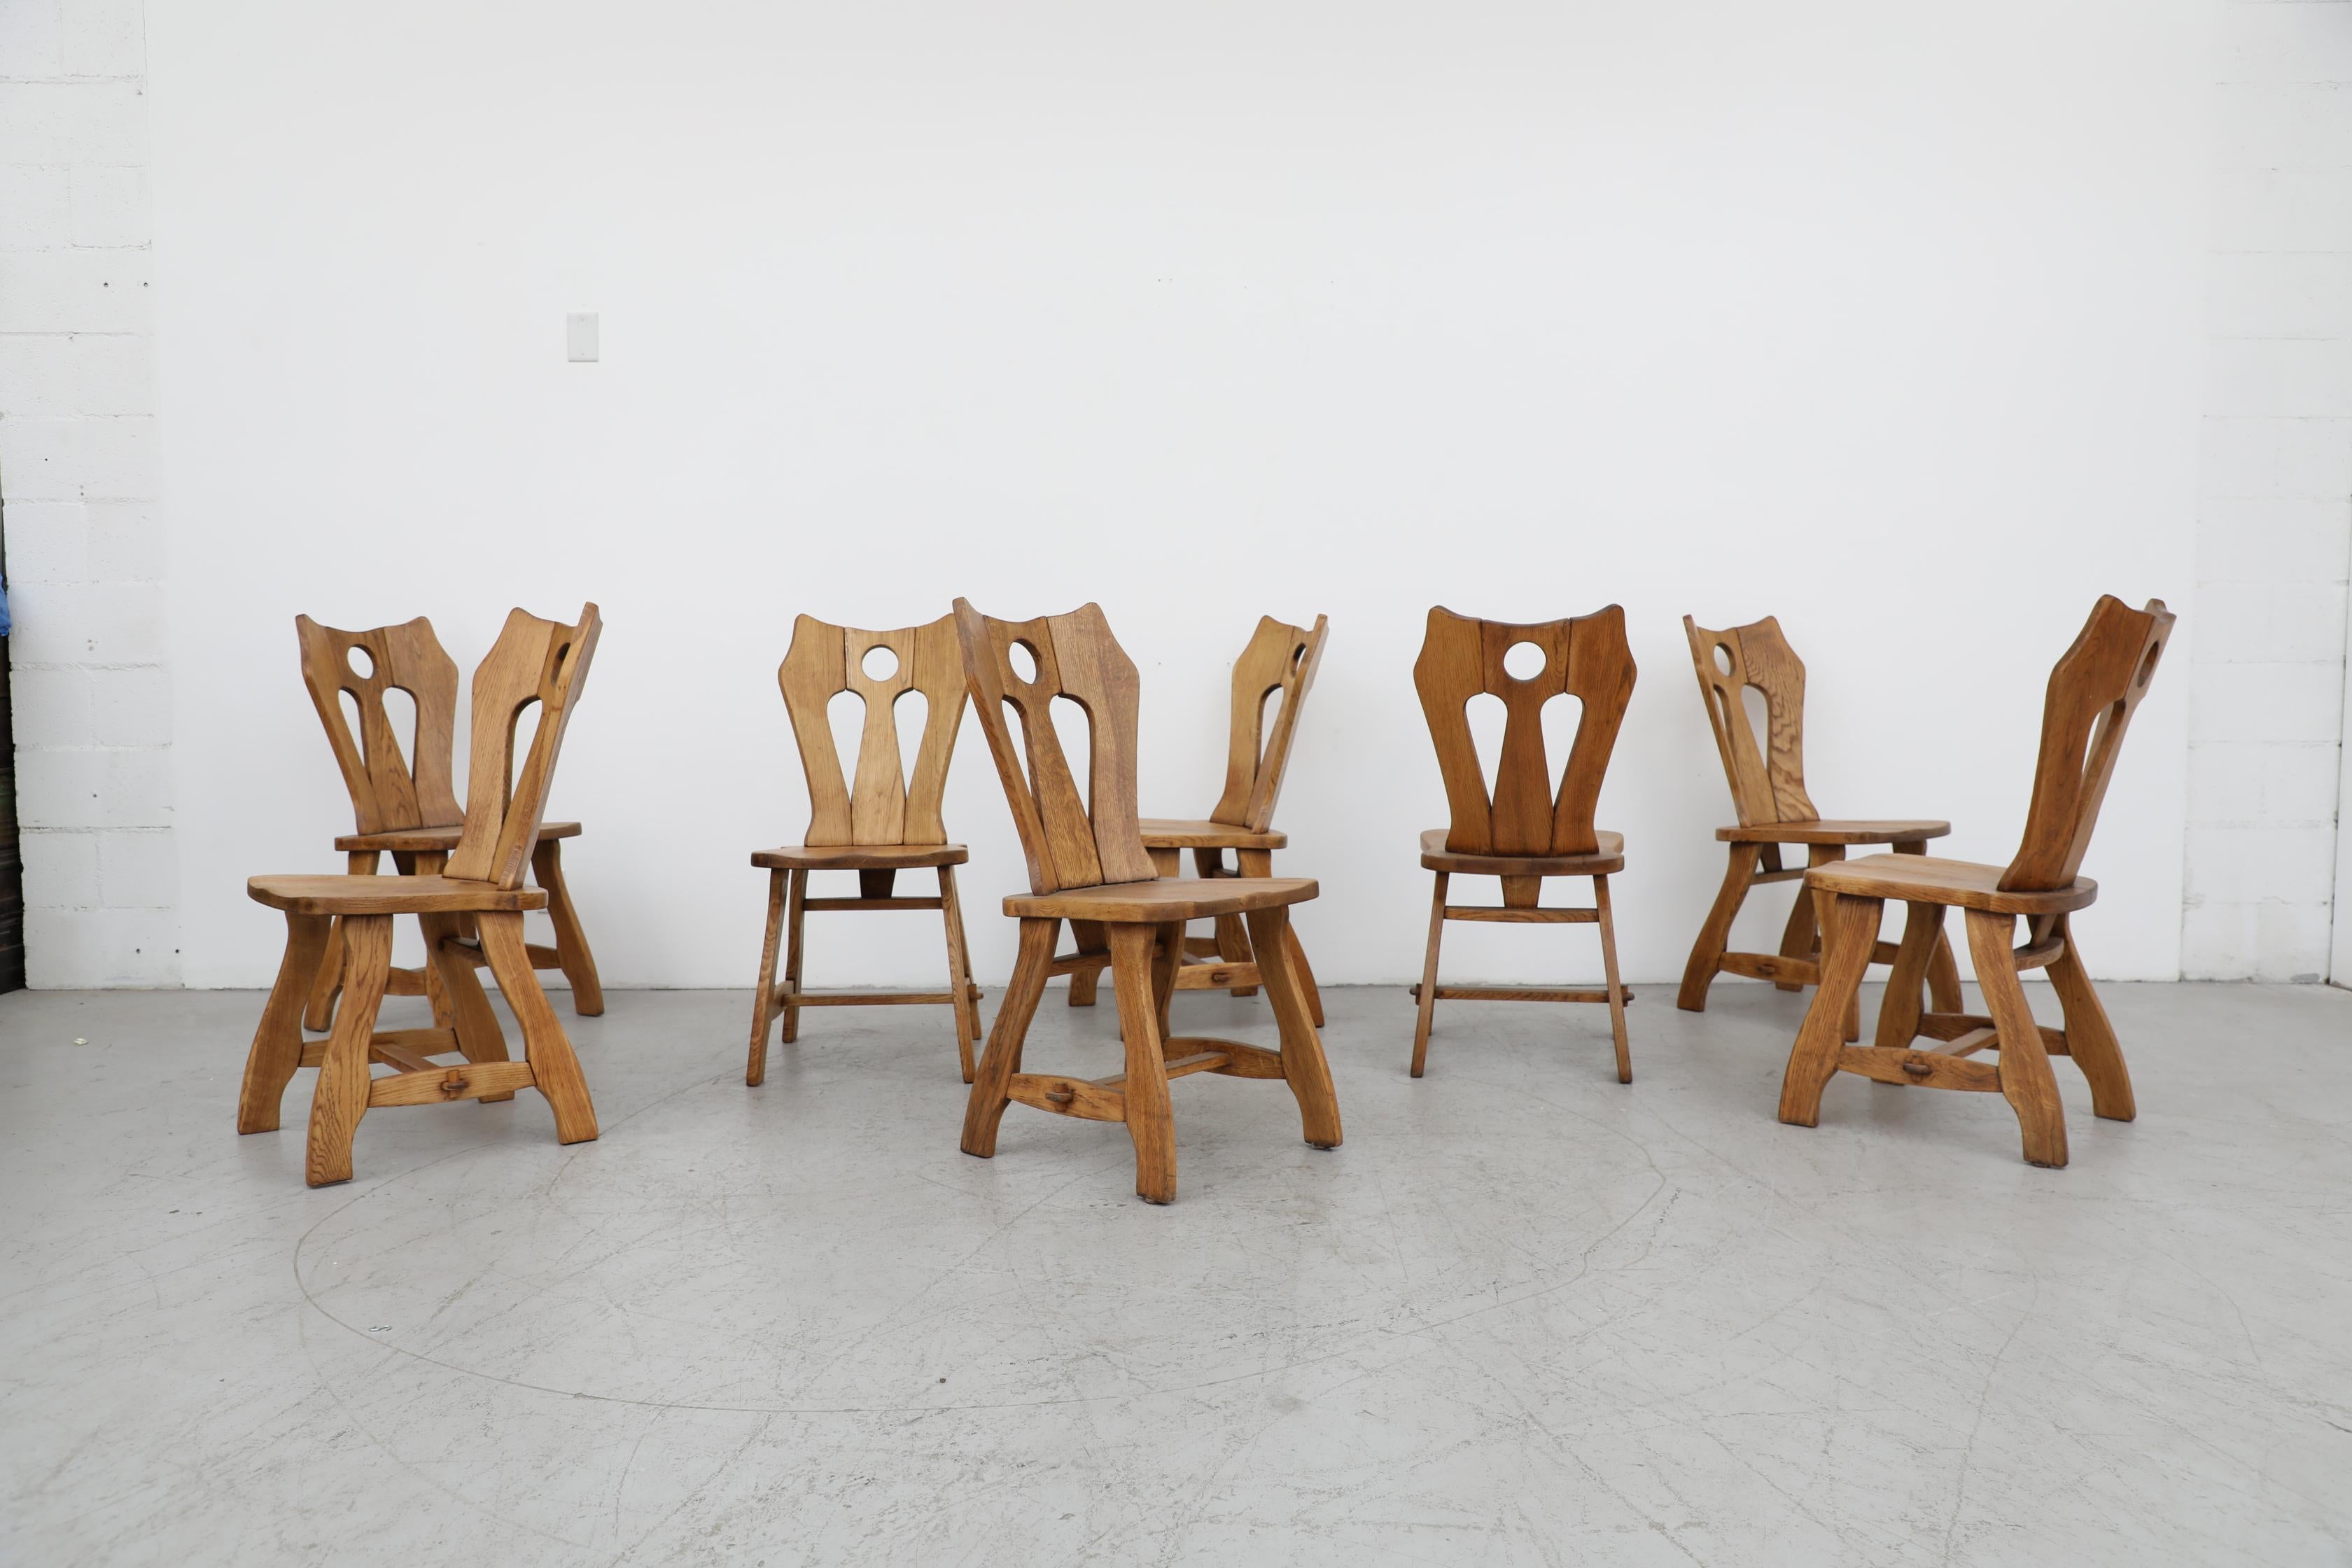 Beautiful Brutalist set of 8 De Puydt solid oak dining chairs with ornately carved backrests. Lightly refinished in otherwise original condition with visible wear, including some missing pegs. Wear is consistent with their age and use.